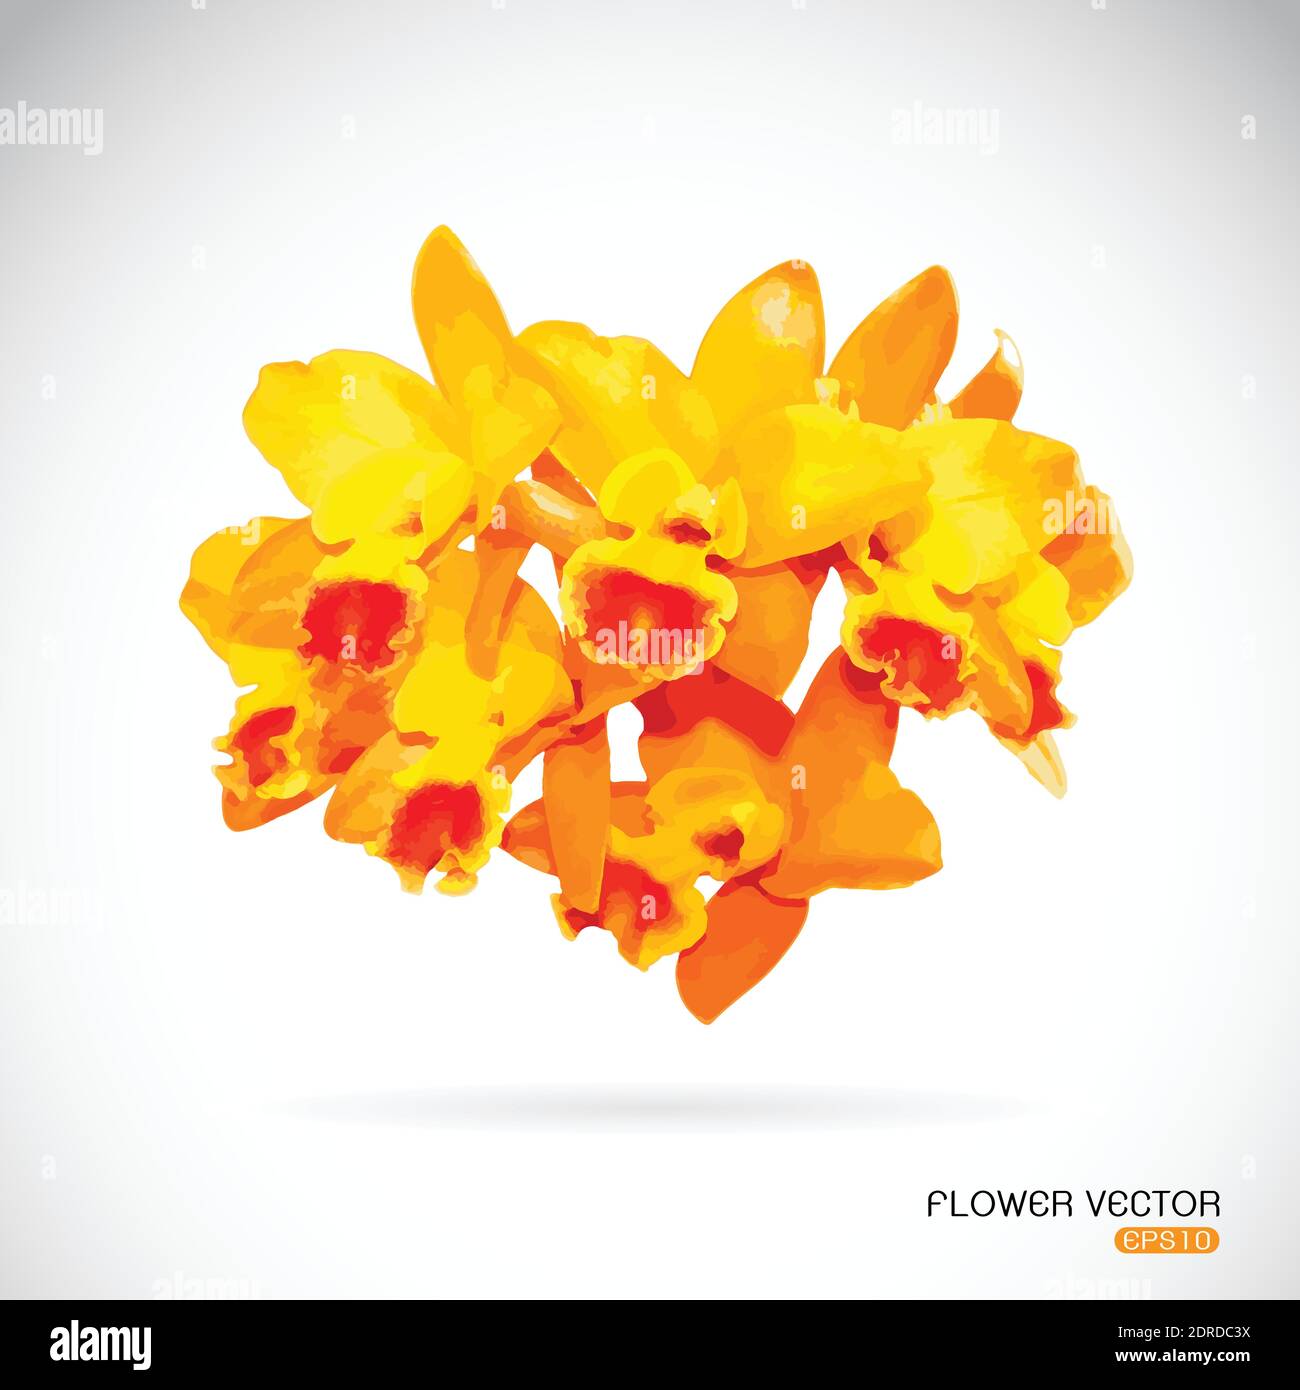 Vector image of orchid flower on white background. Easy editable layered vector illustration. Stock Vector